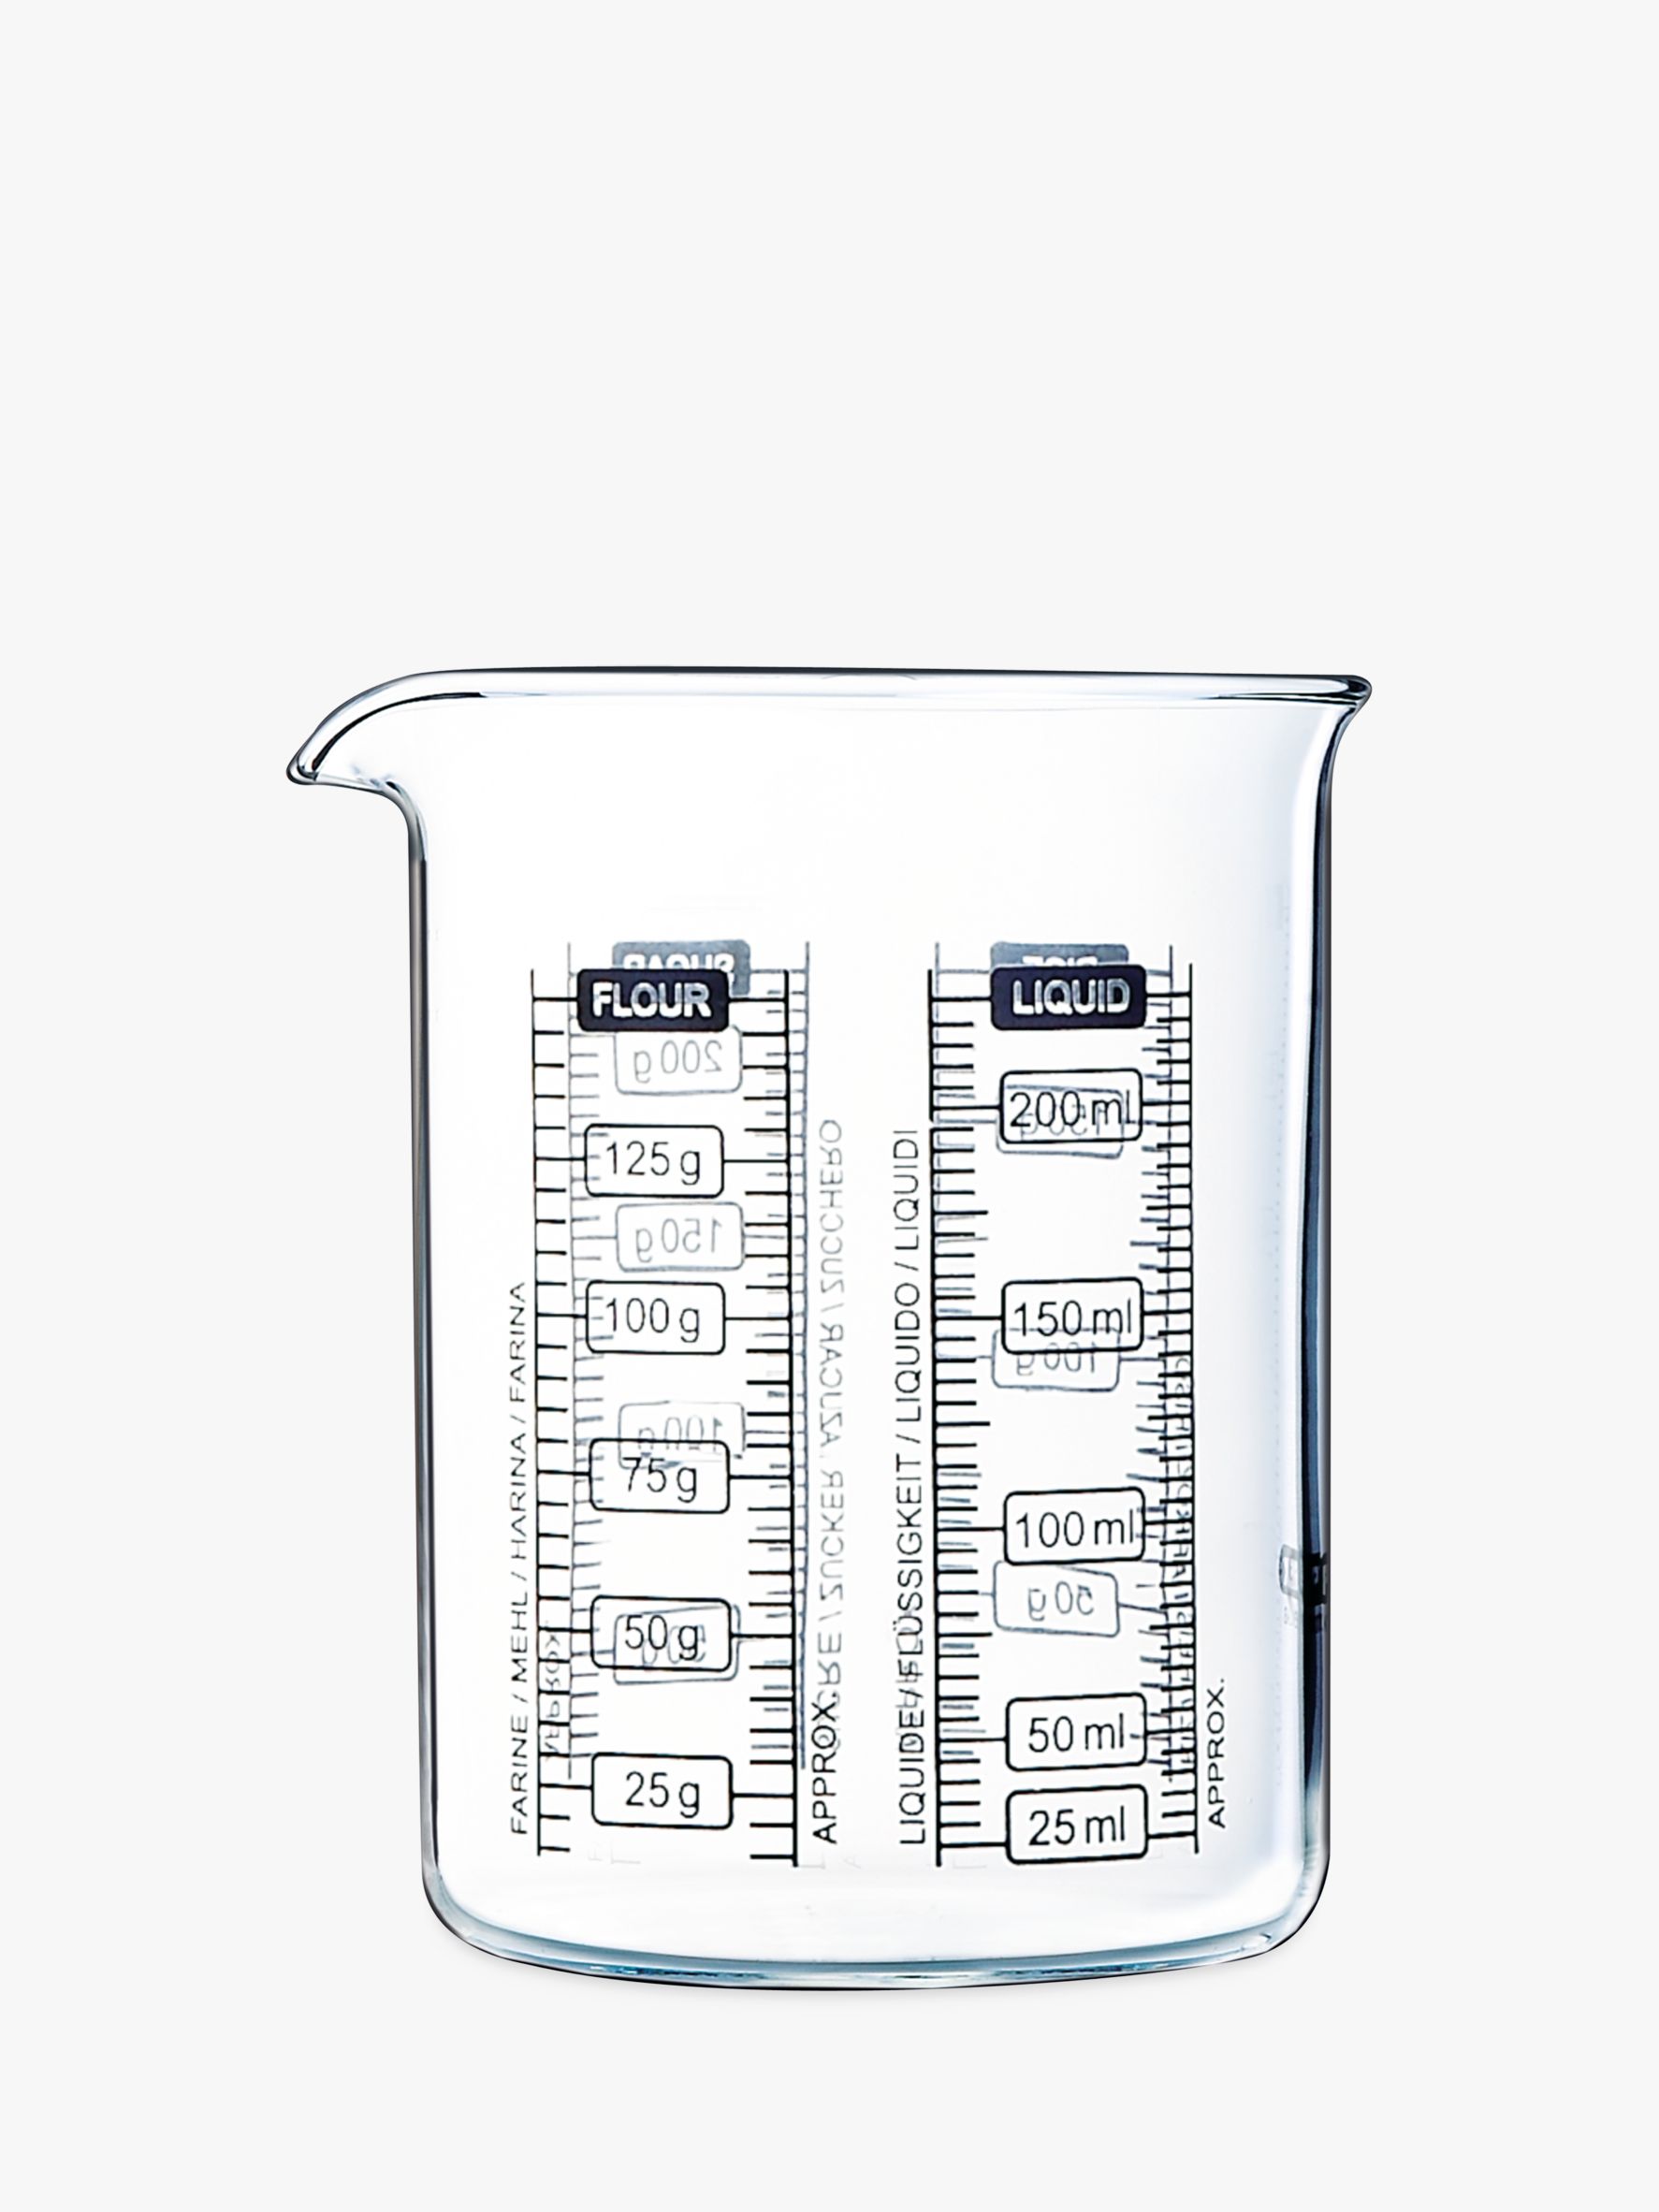 Save on Pyrex Liquid Measuring Cup - 4 cup Order Online Delivery